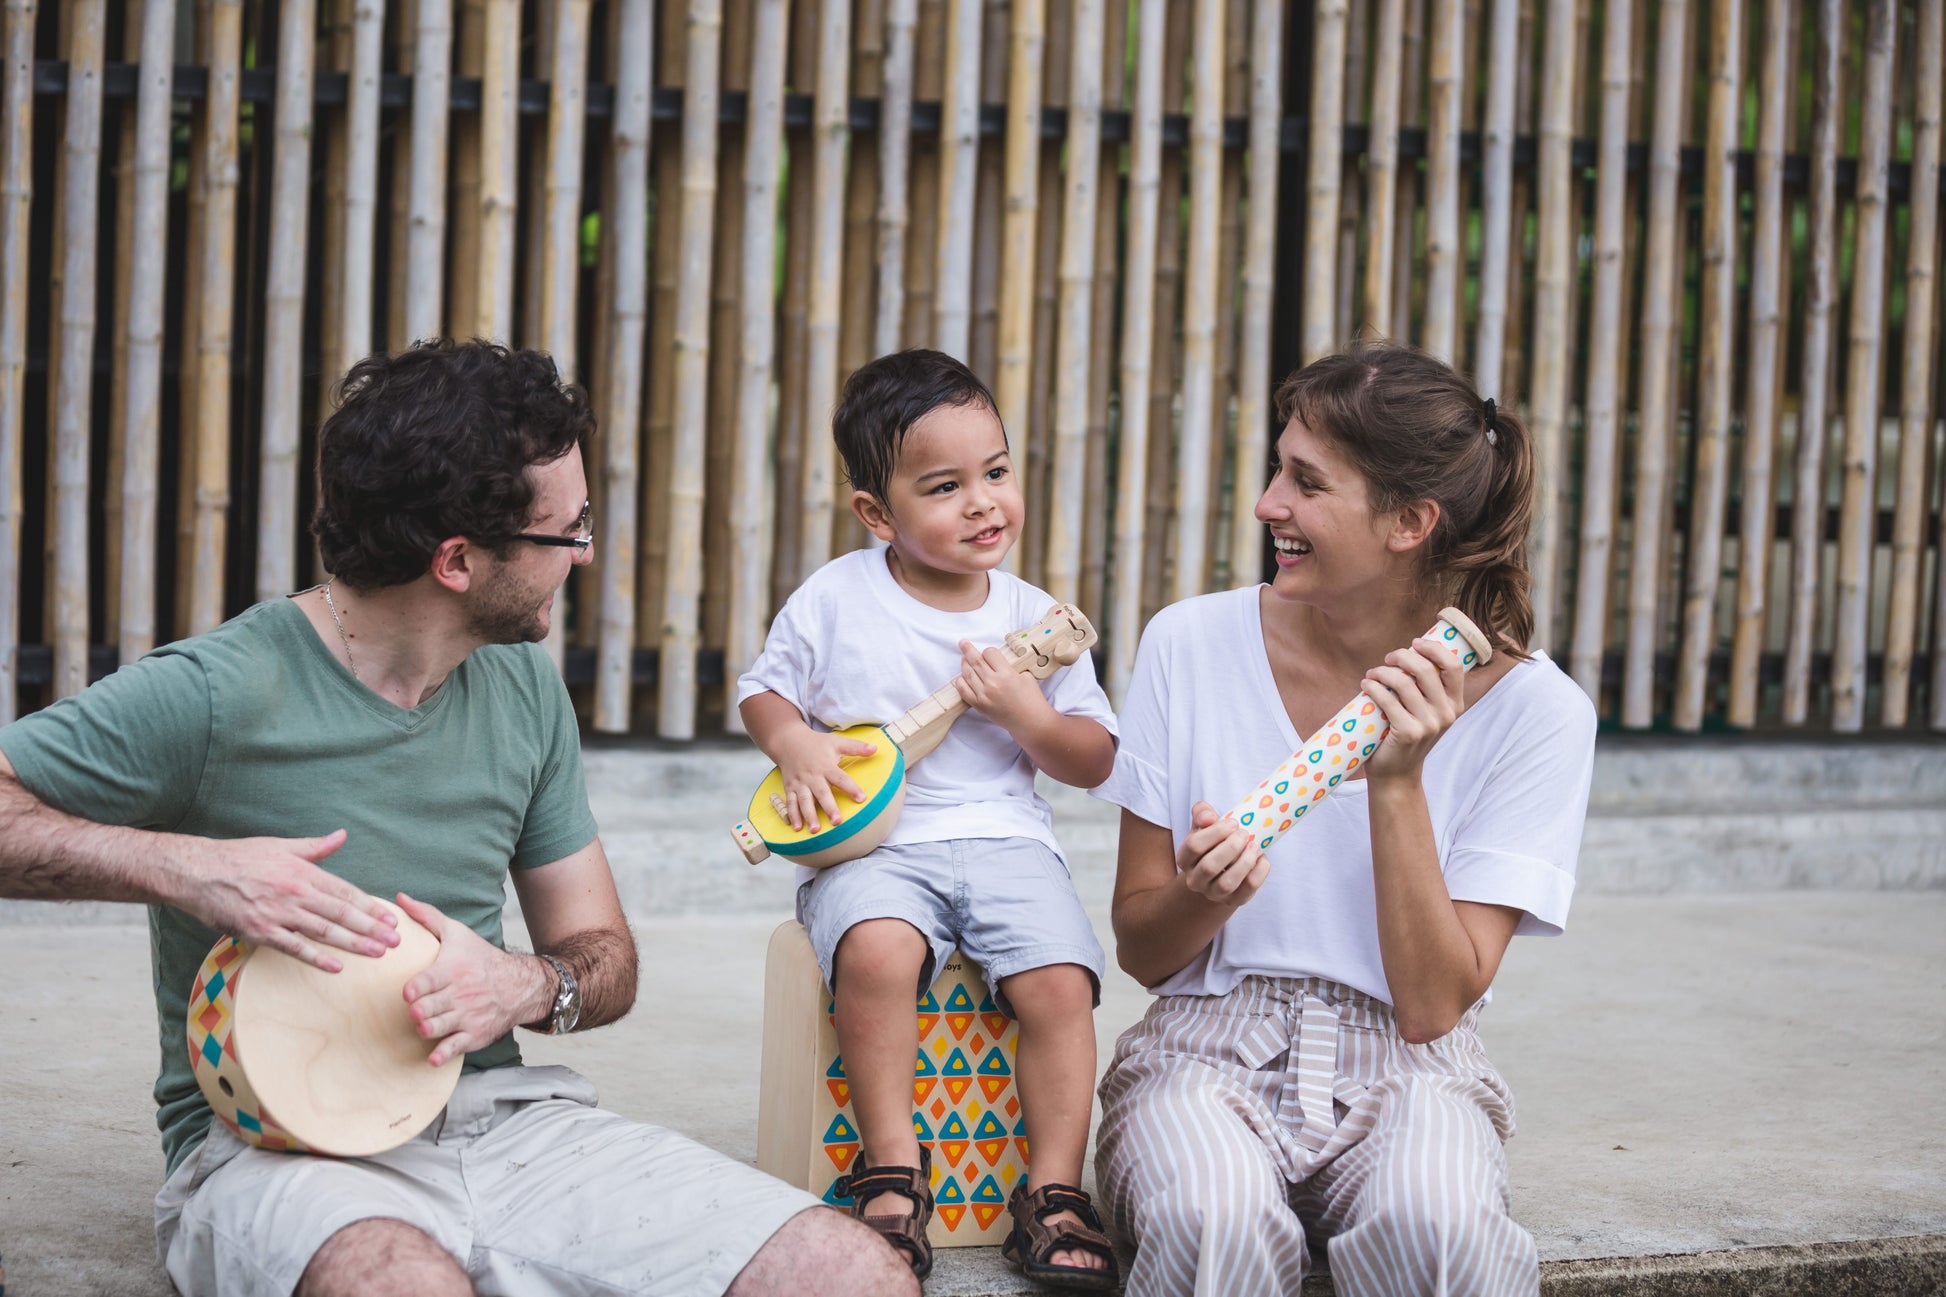 two adults and a child sitting outside playing with toy musical instruments by PlanToys